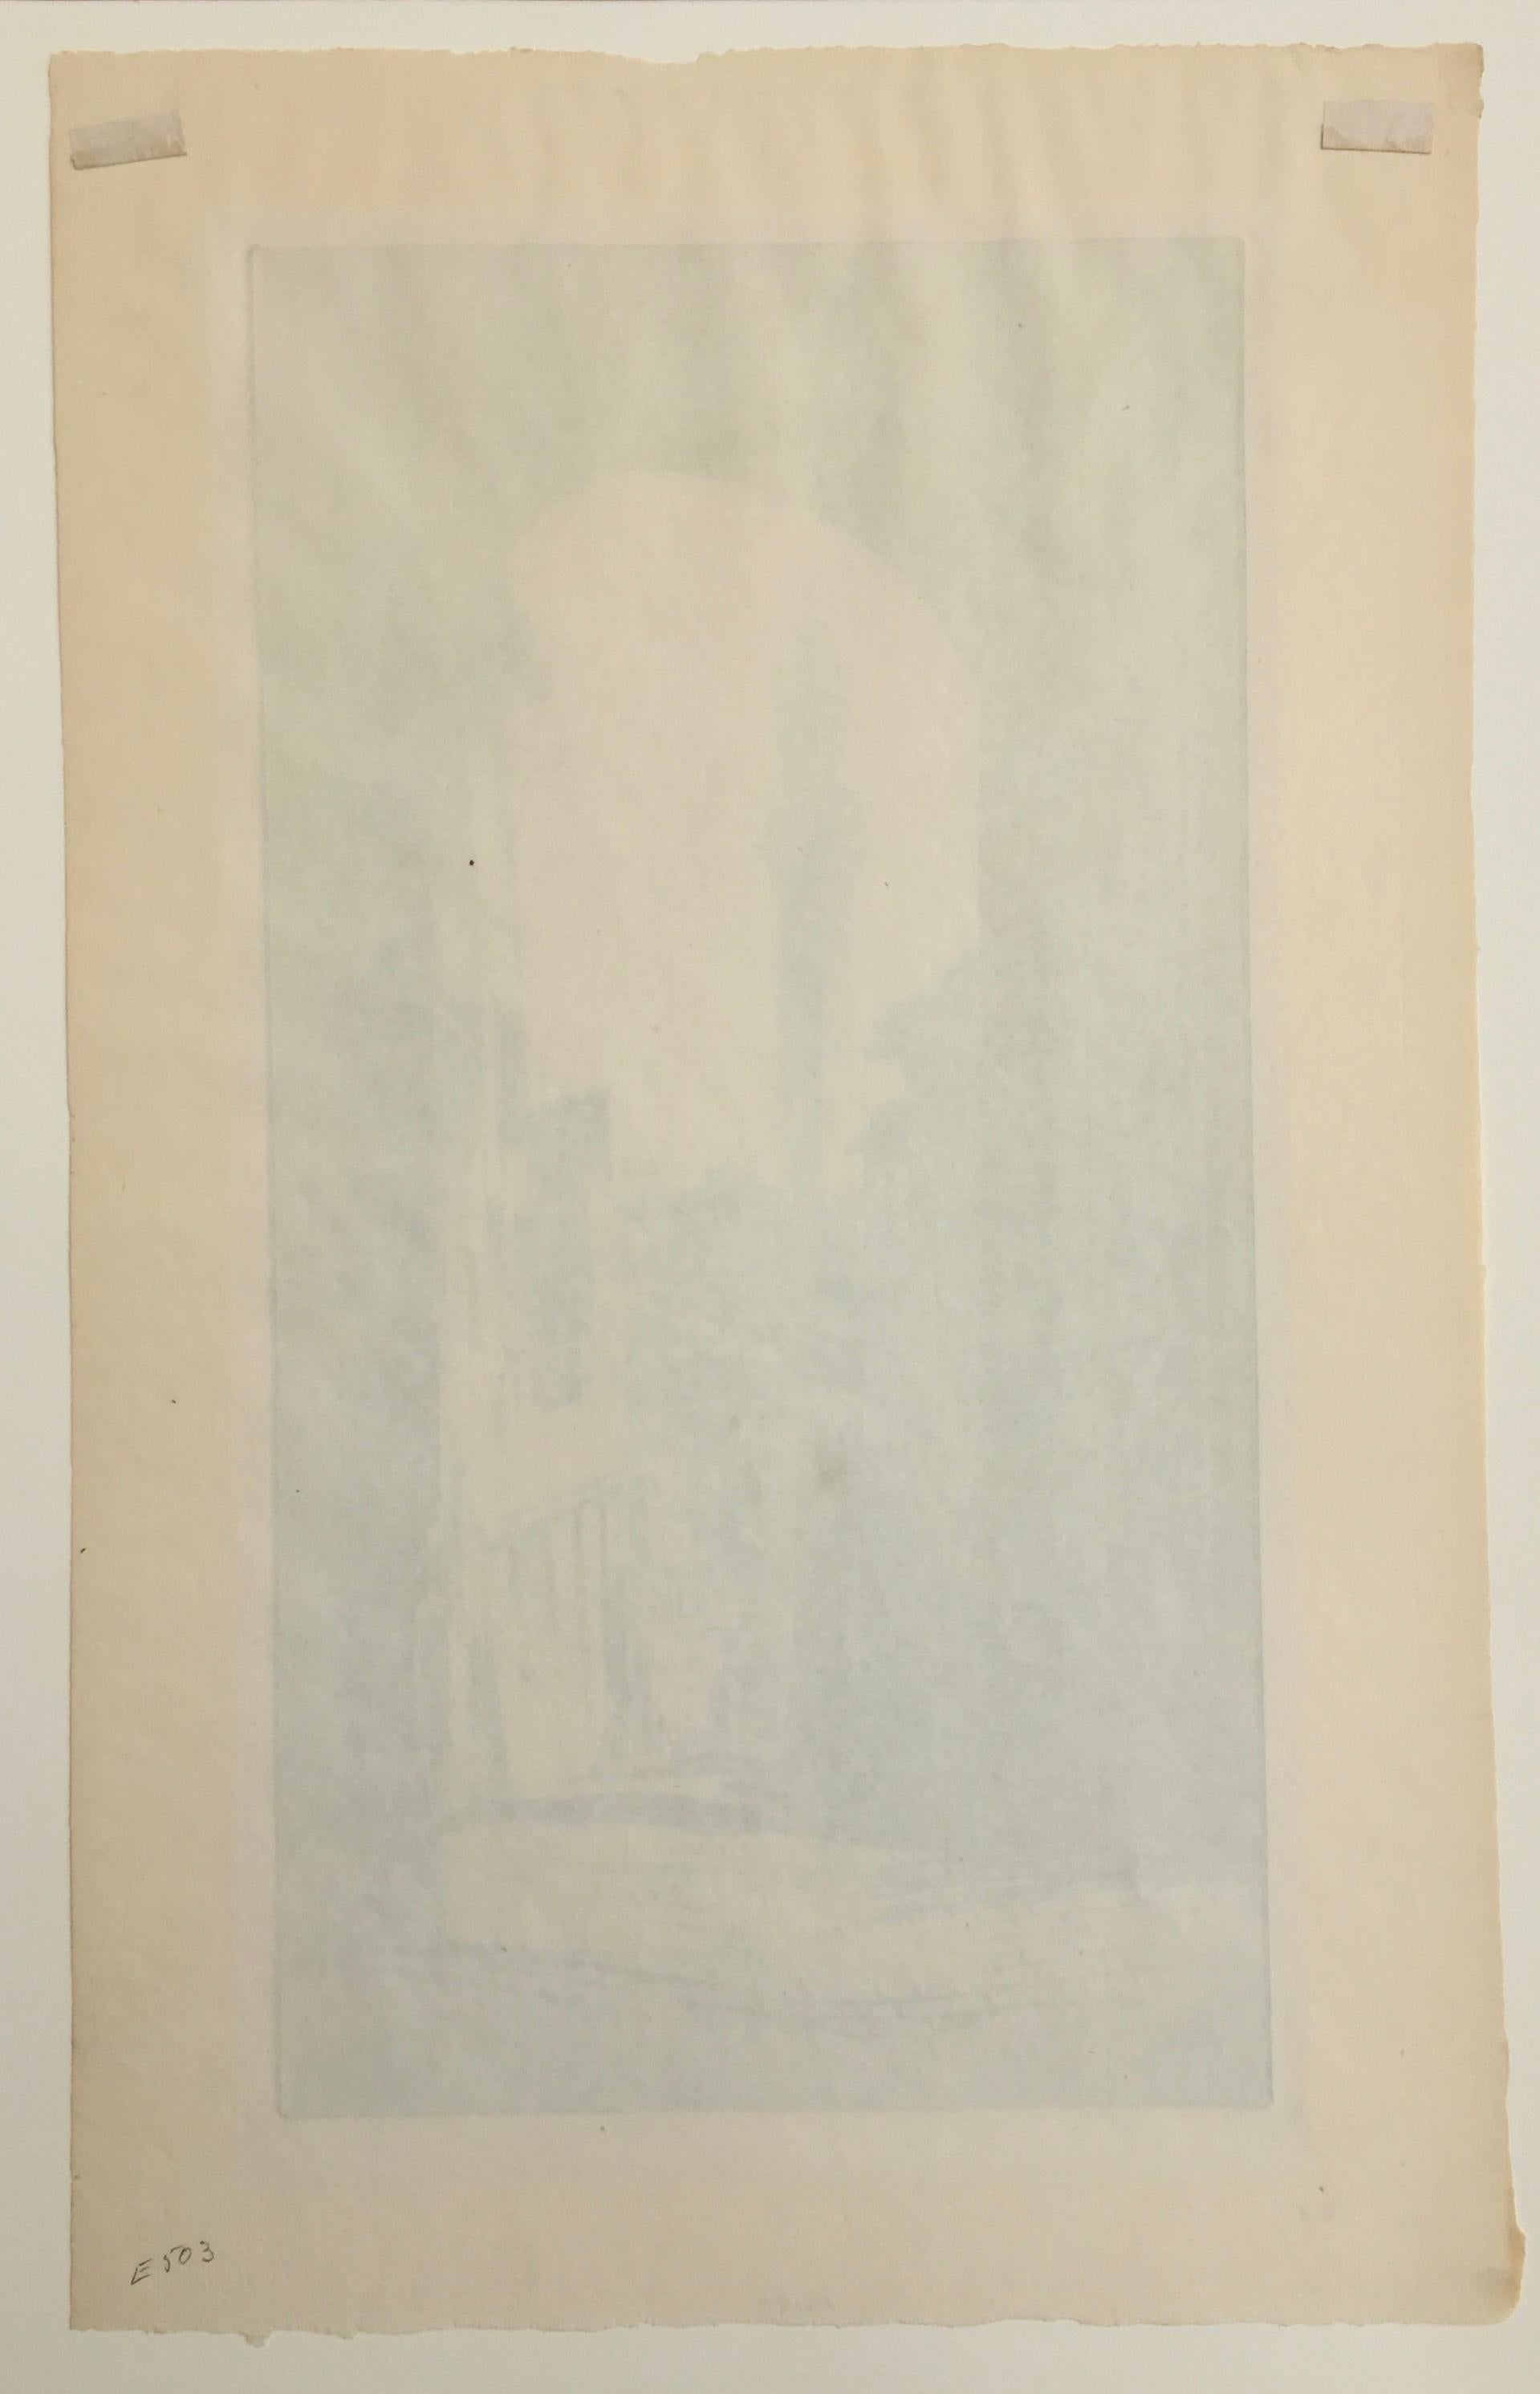 JOHN TAYLOR ARMS  (American  1887–1953)
LA TORRE MANGIA, SIENA, 1927 (Fletcher 192)
Etching, signed and dated in pencil and titled  in the plate. Edition 115. No. 10 in the Italian Series. 15 x 8 inches. Sheet with full margins and deckle edges 18 x